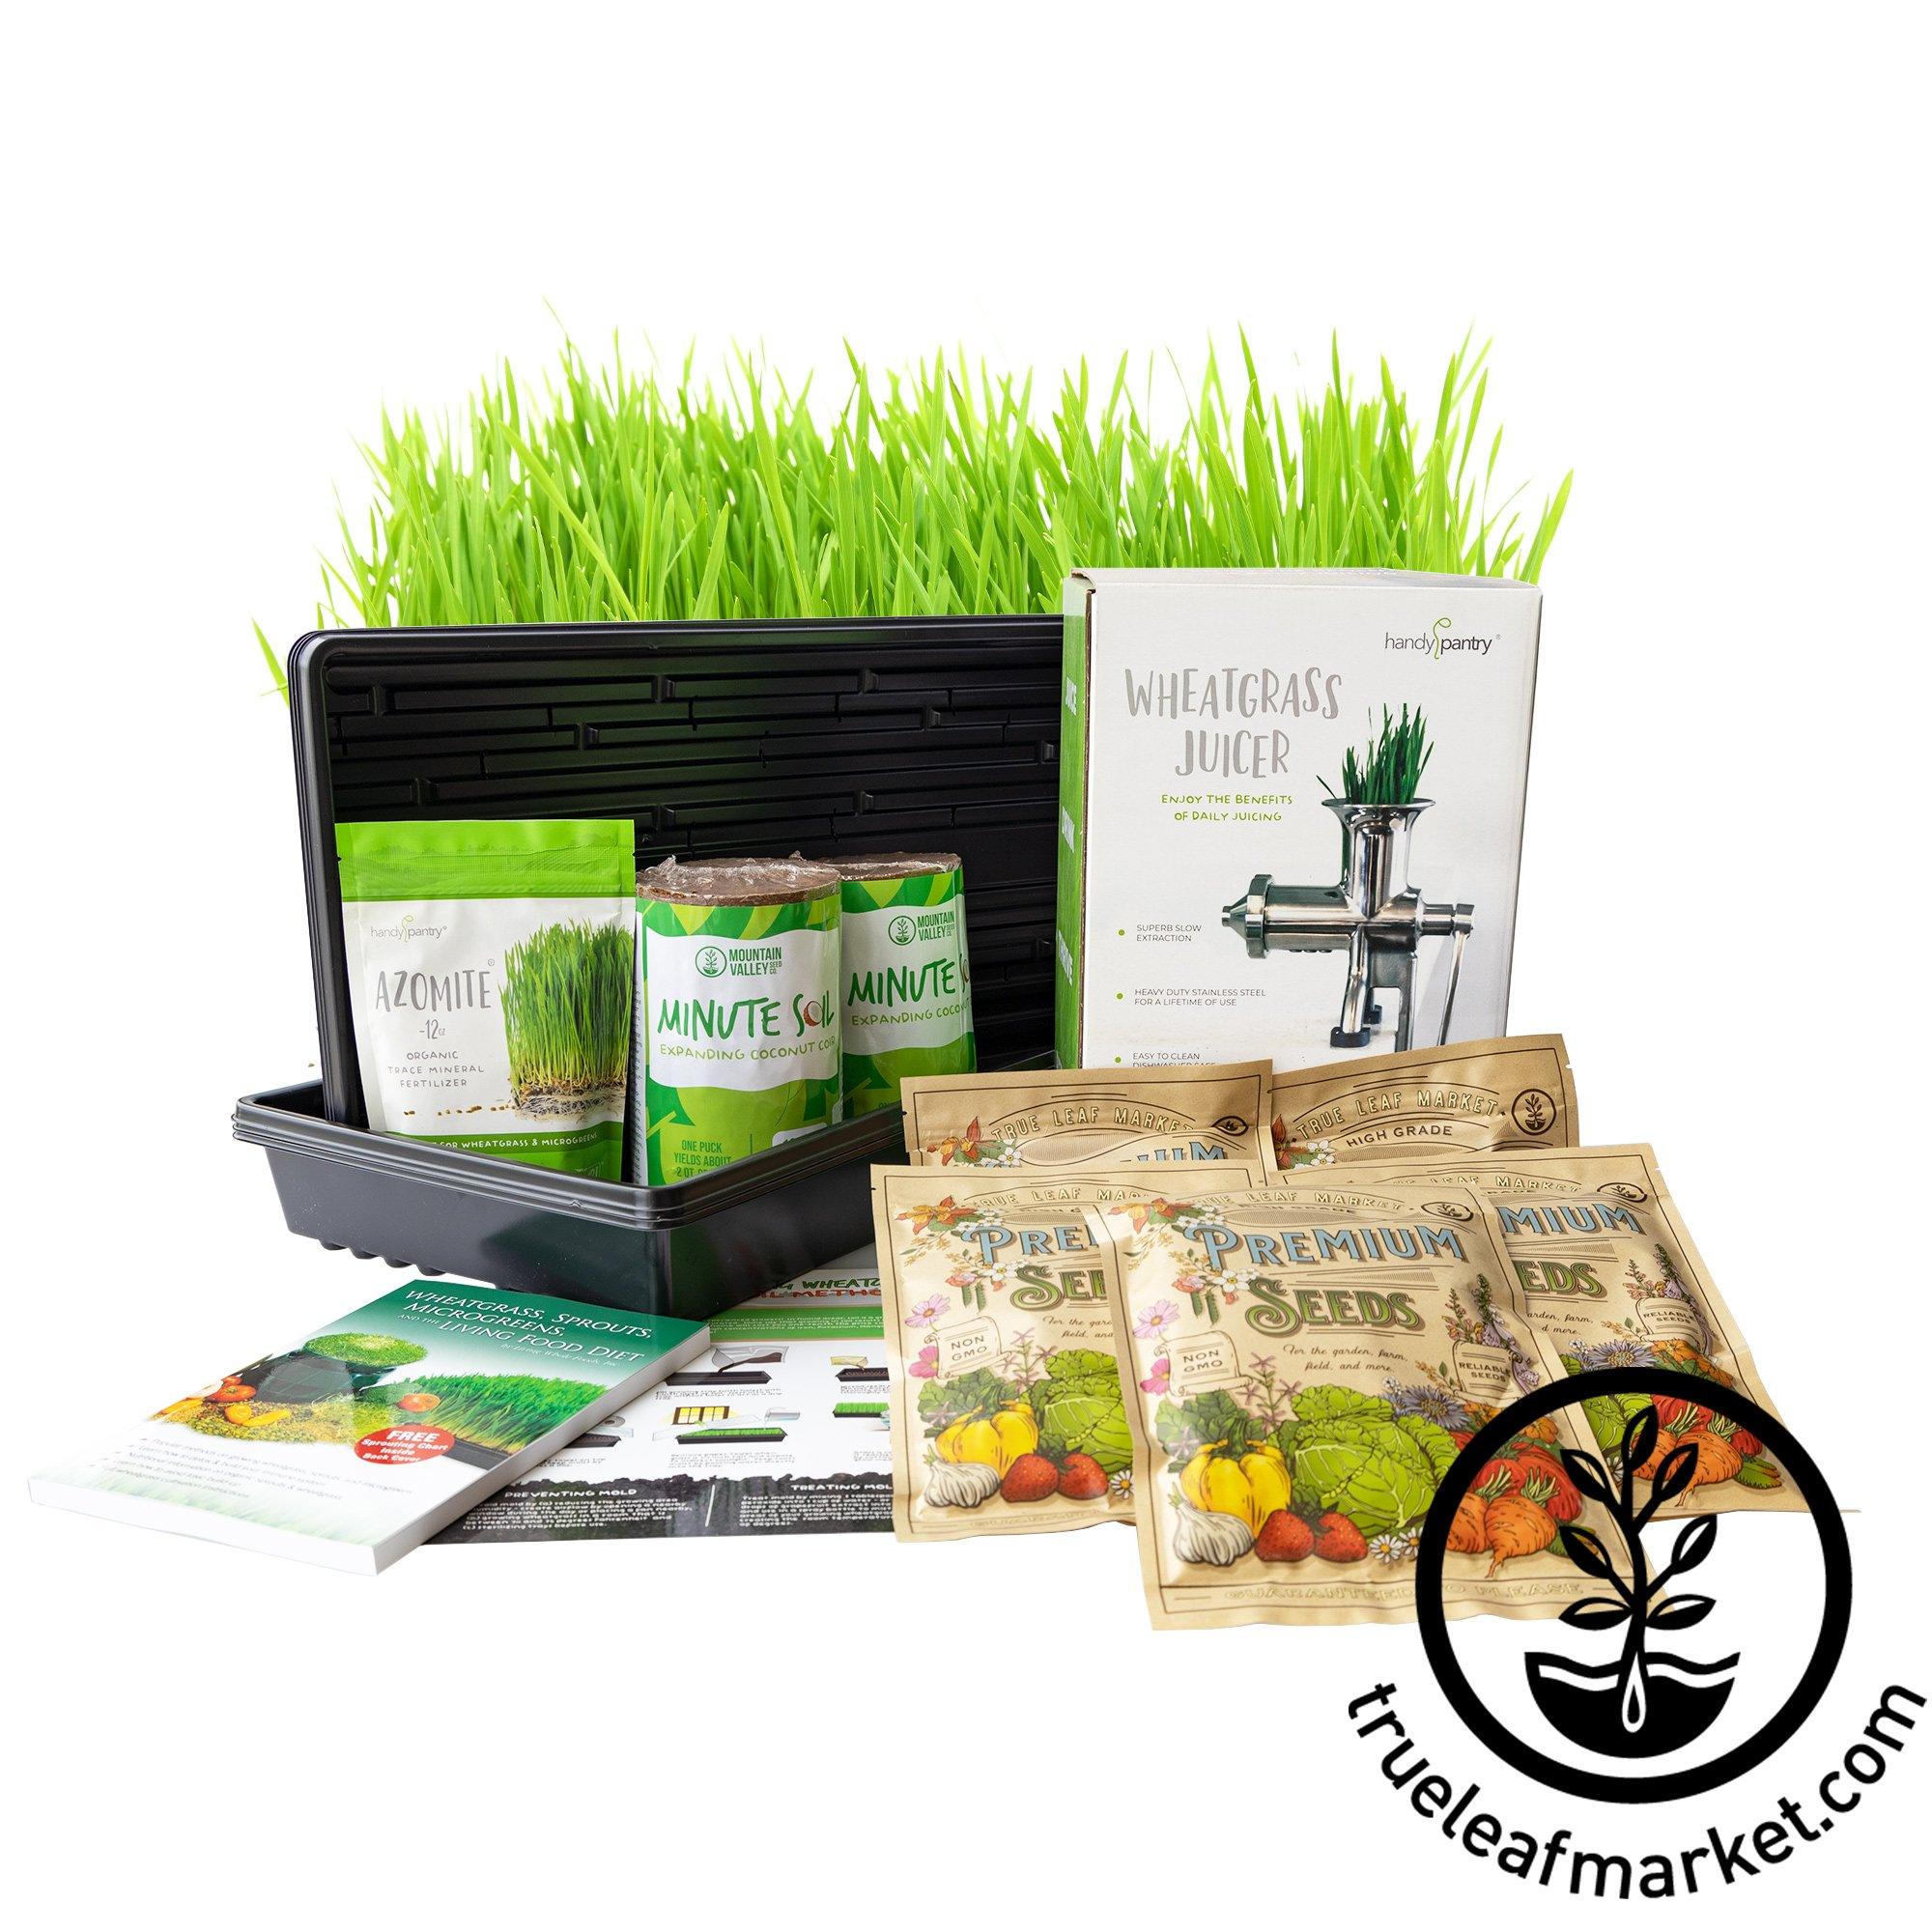 | Wheatgrass Seed Market Steel Juicer Hurricane by True Company Handy Manual Pantry Stainless Leaf